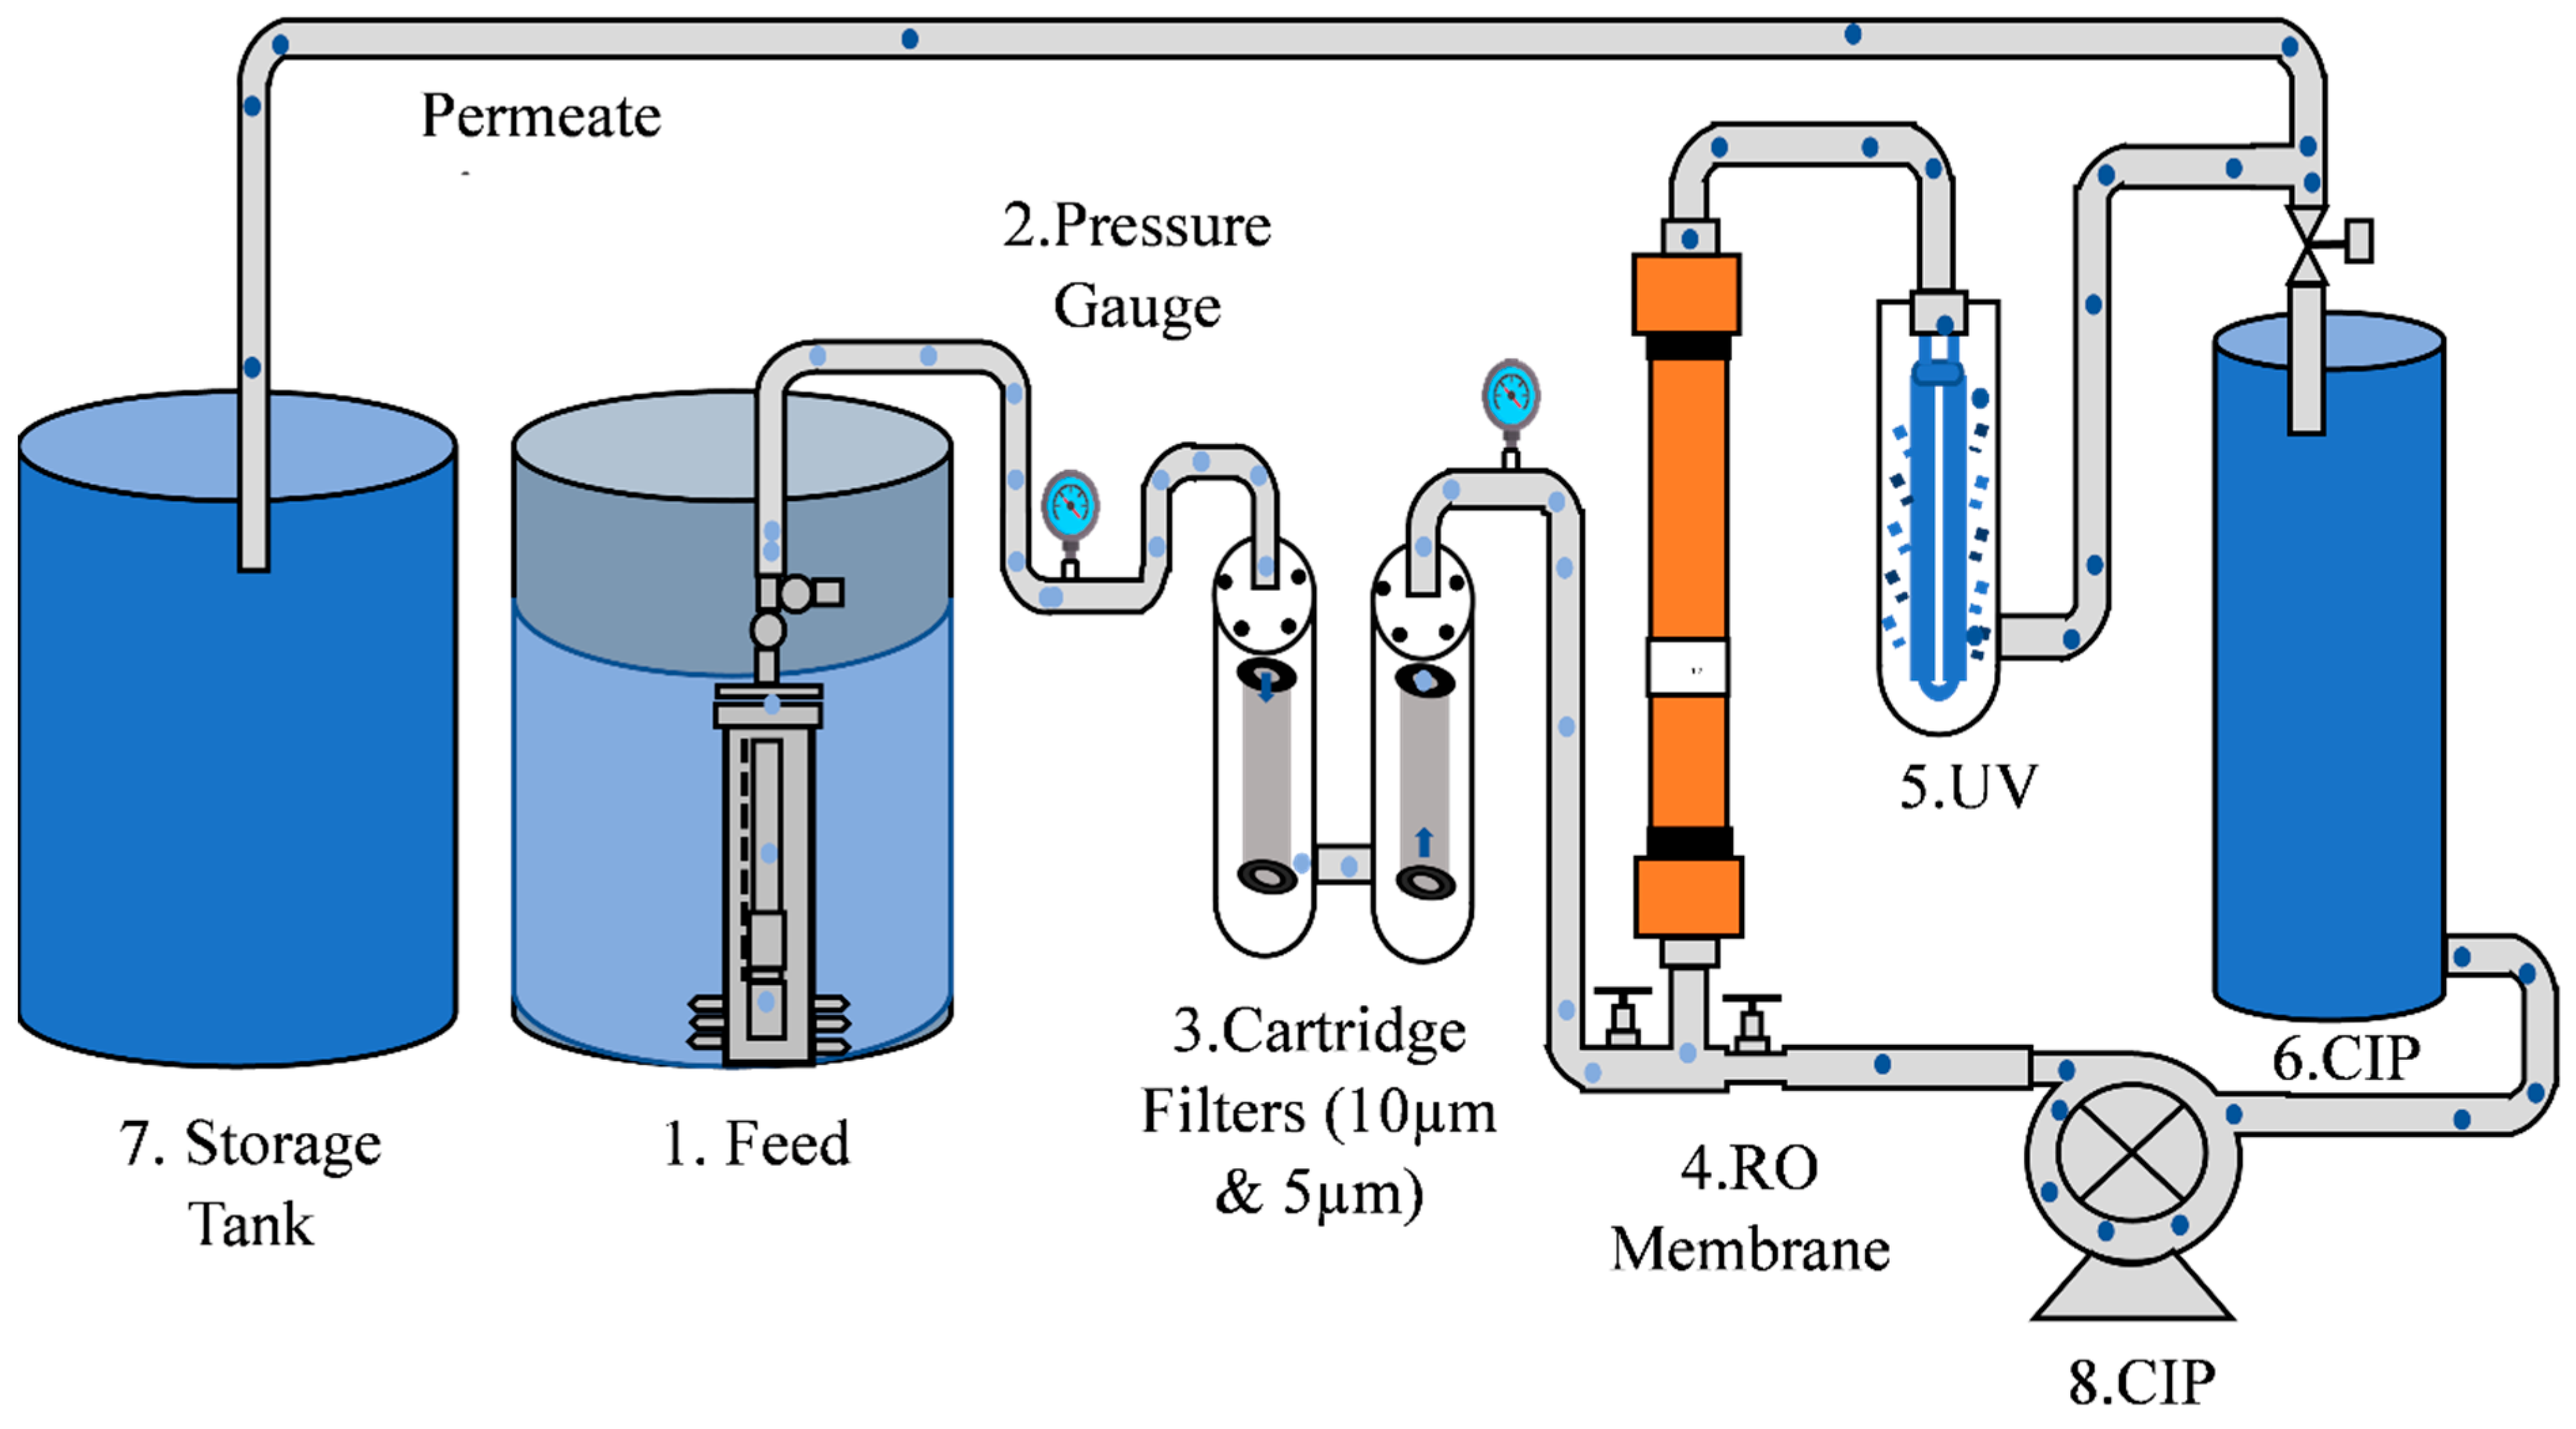 Reverse Osmosis and RO+UV Water Purifiers Working Explained